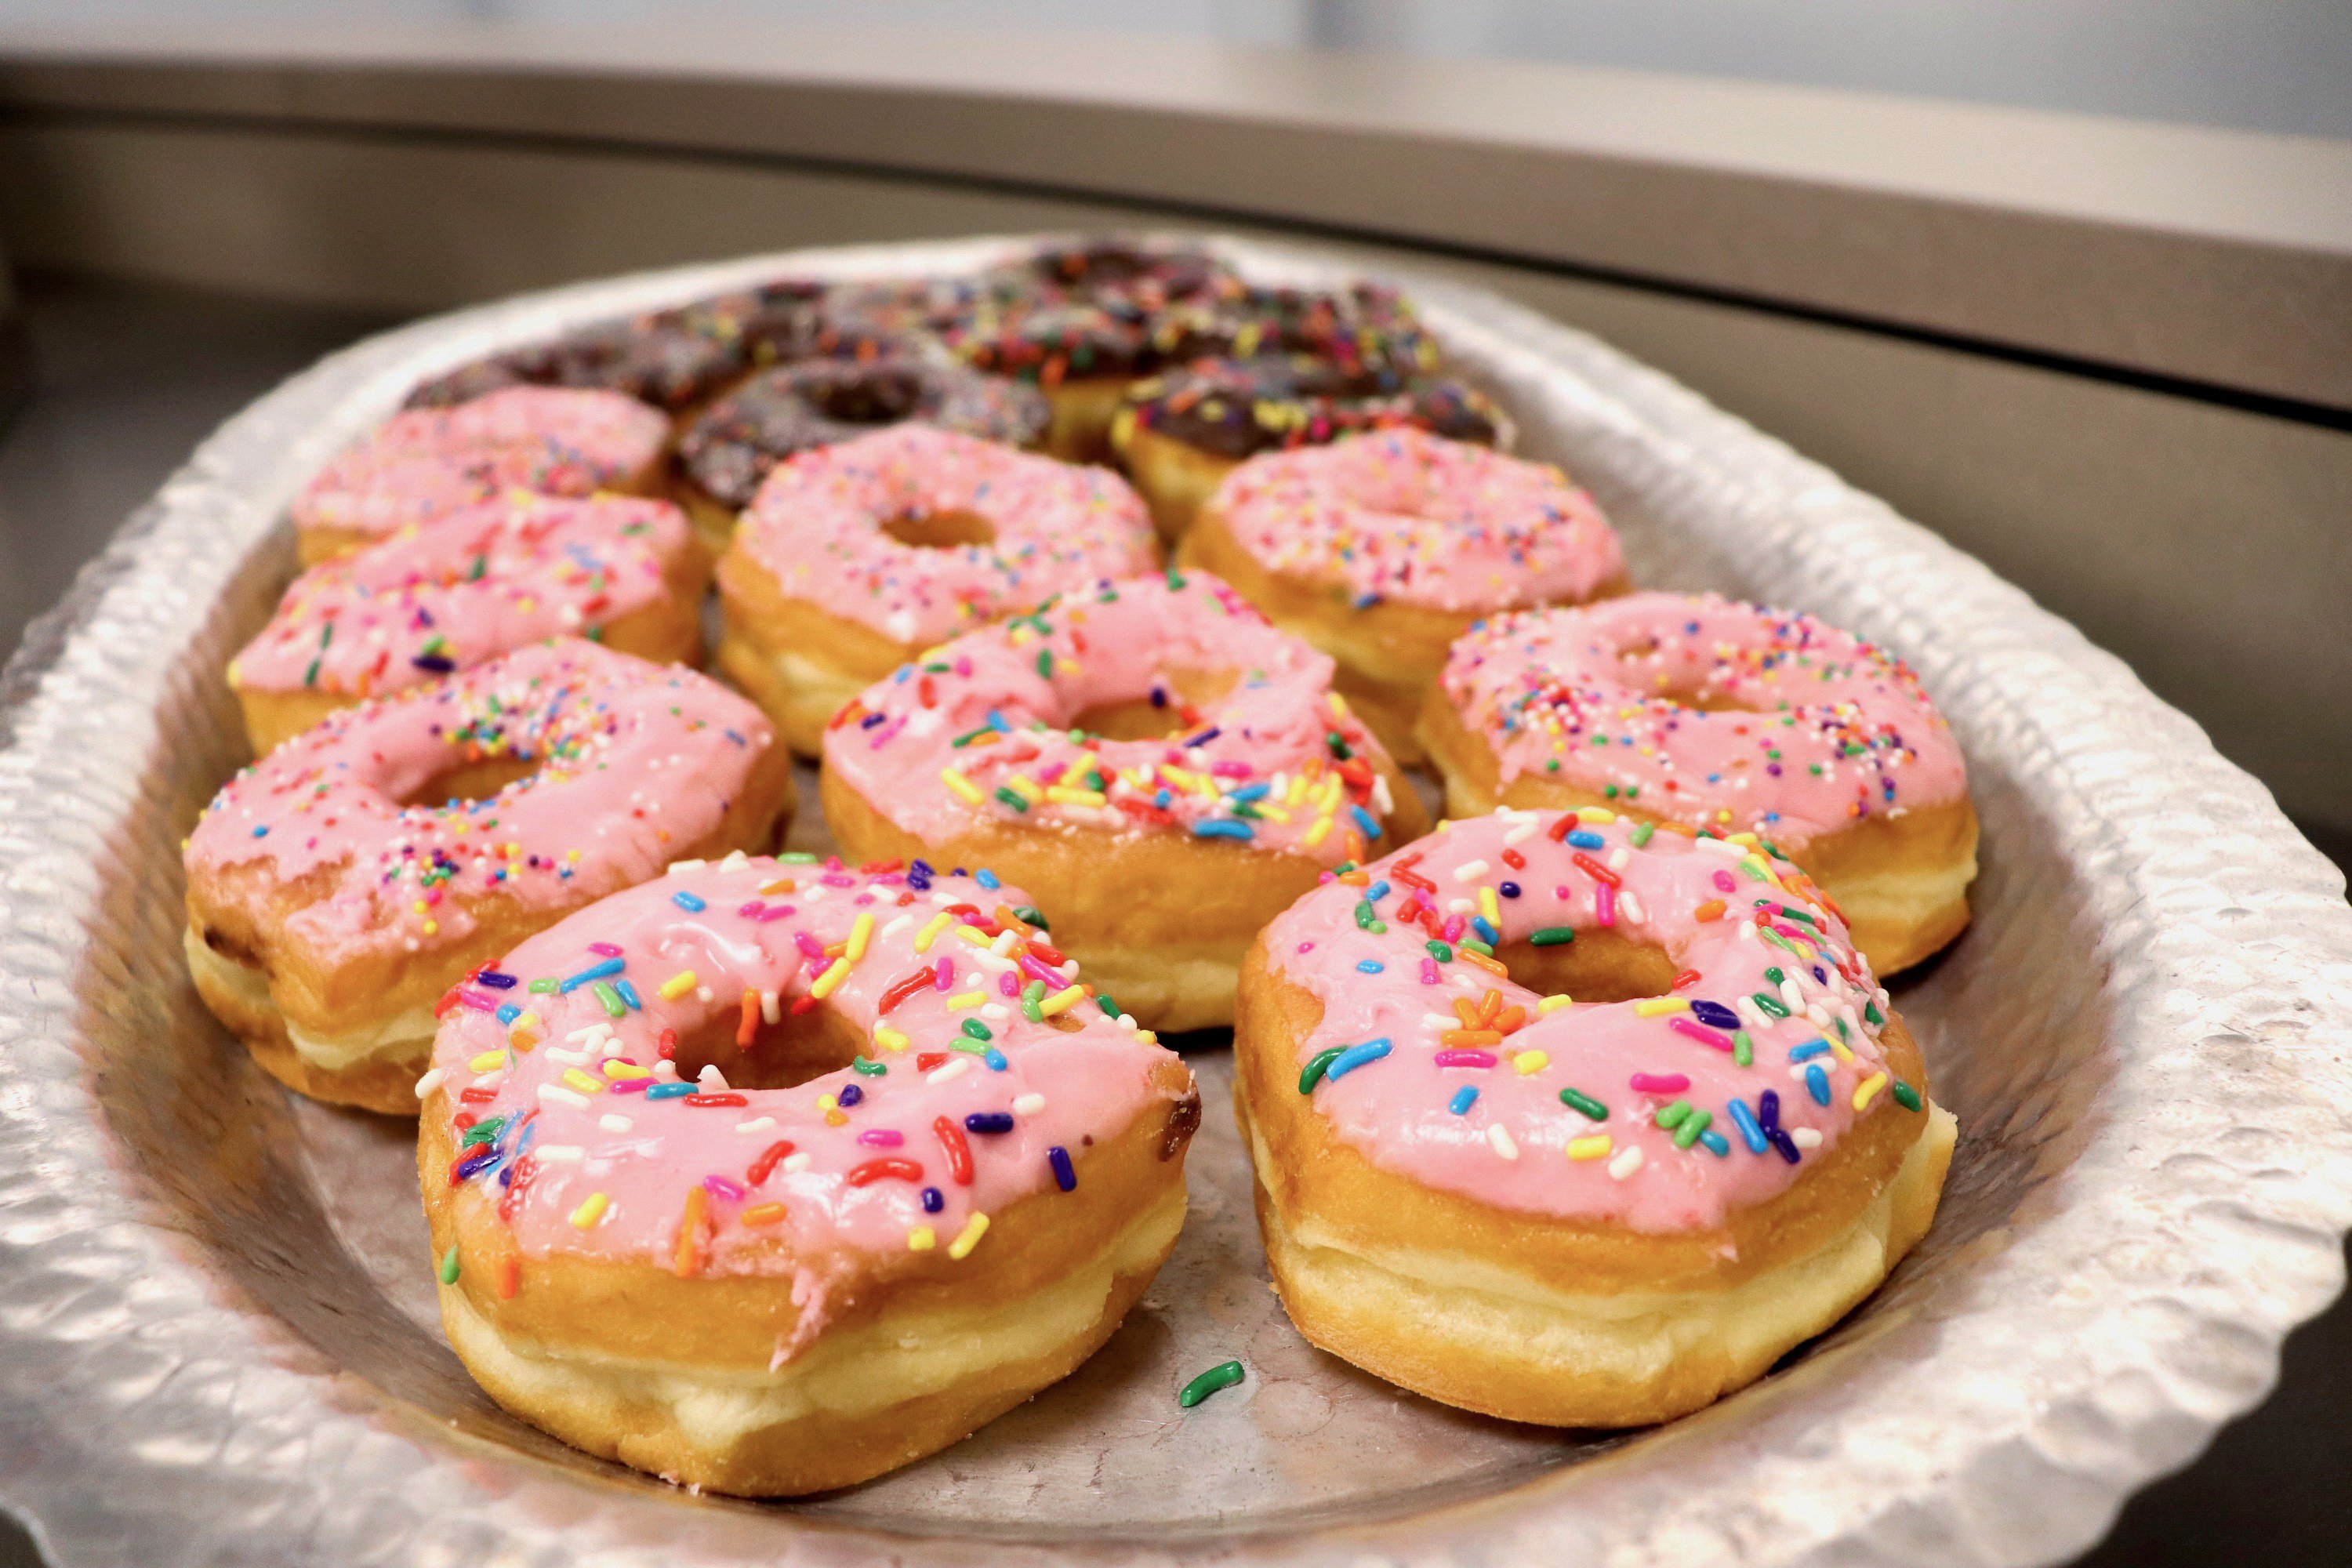 Variations of frosted donuts with sprinkles were available for the attendees.